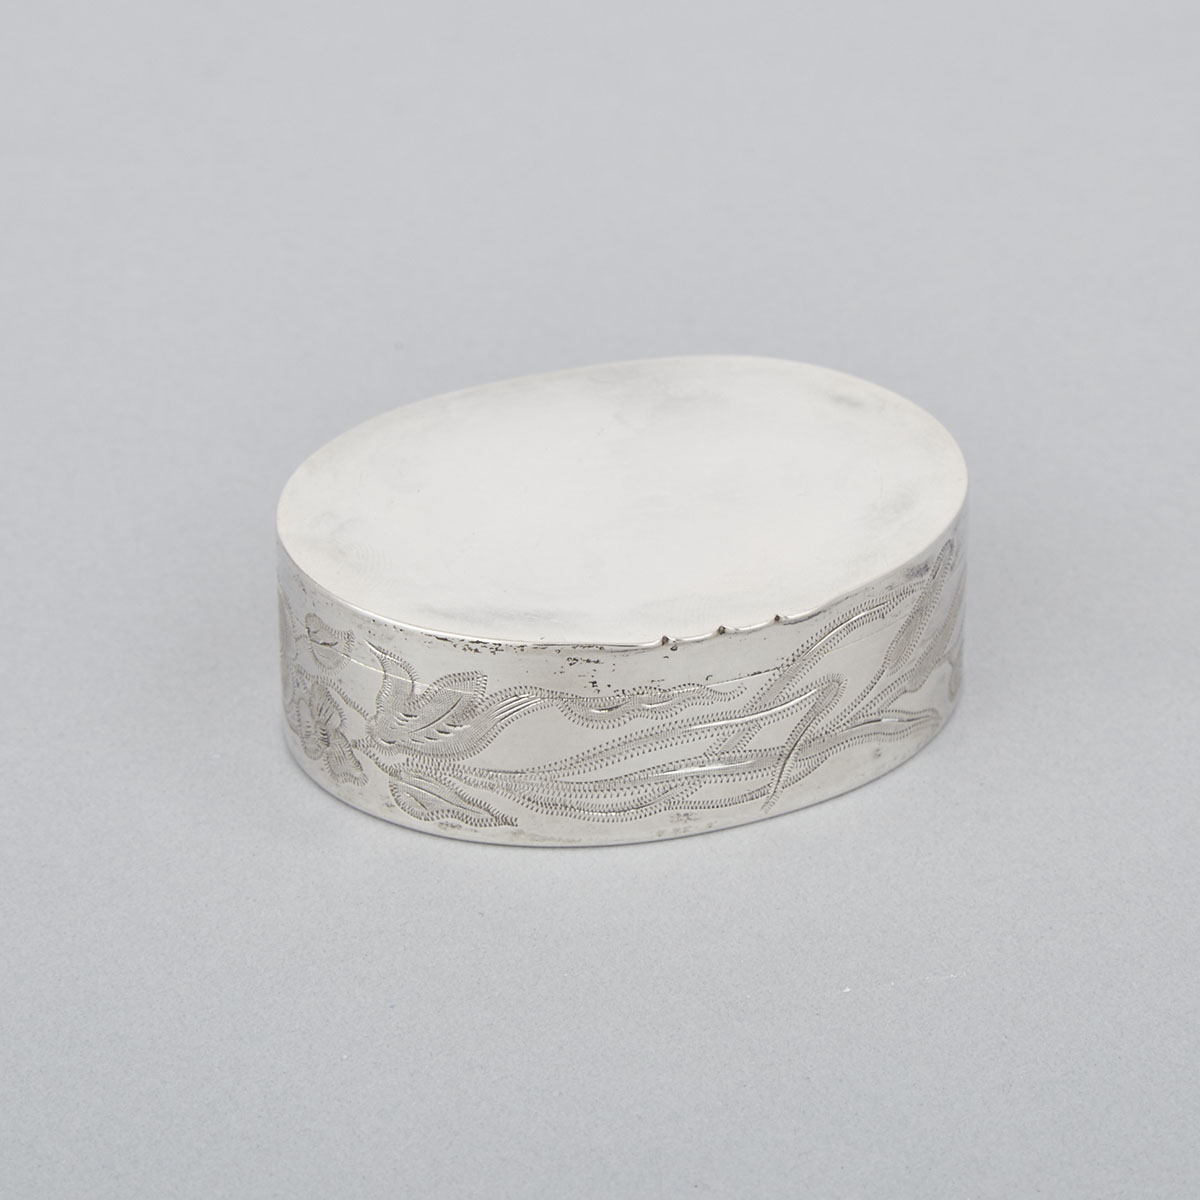 Canadian Silver Oval Snuff Box, George Savage, Montreal, Que., c.1830